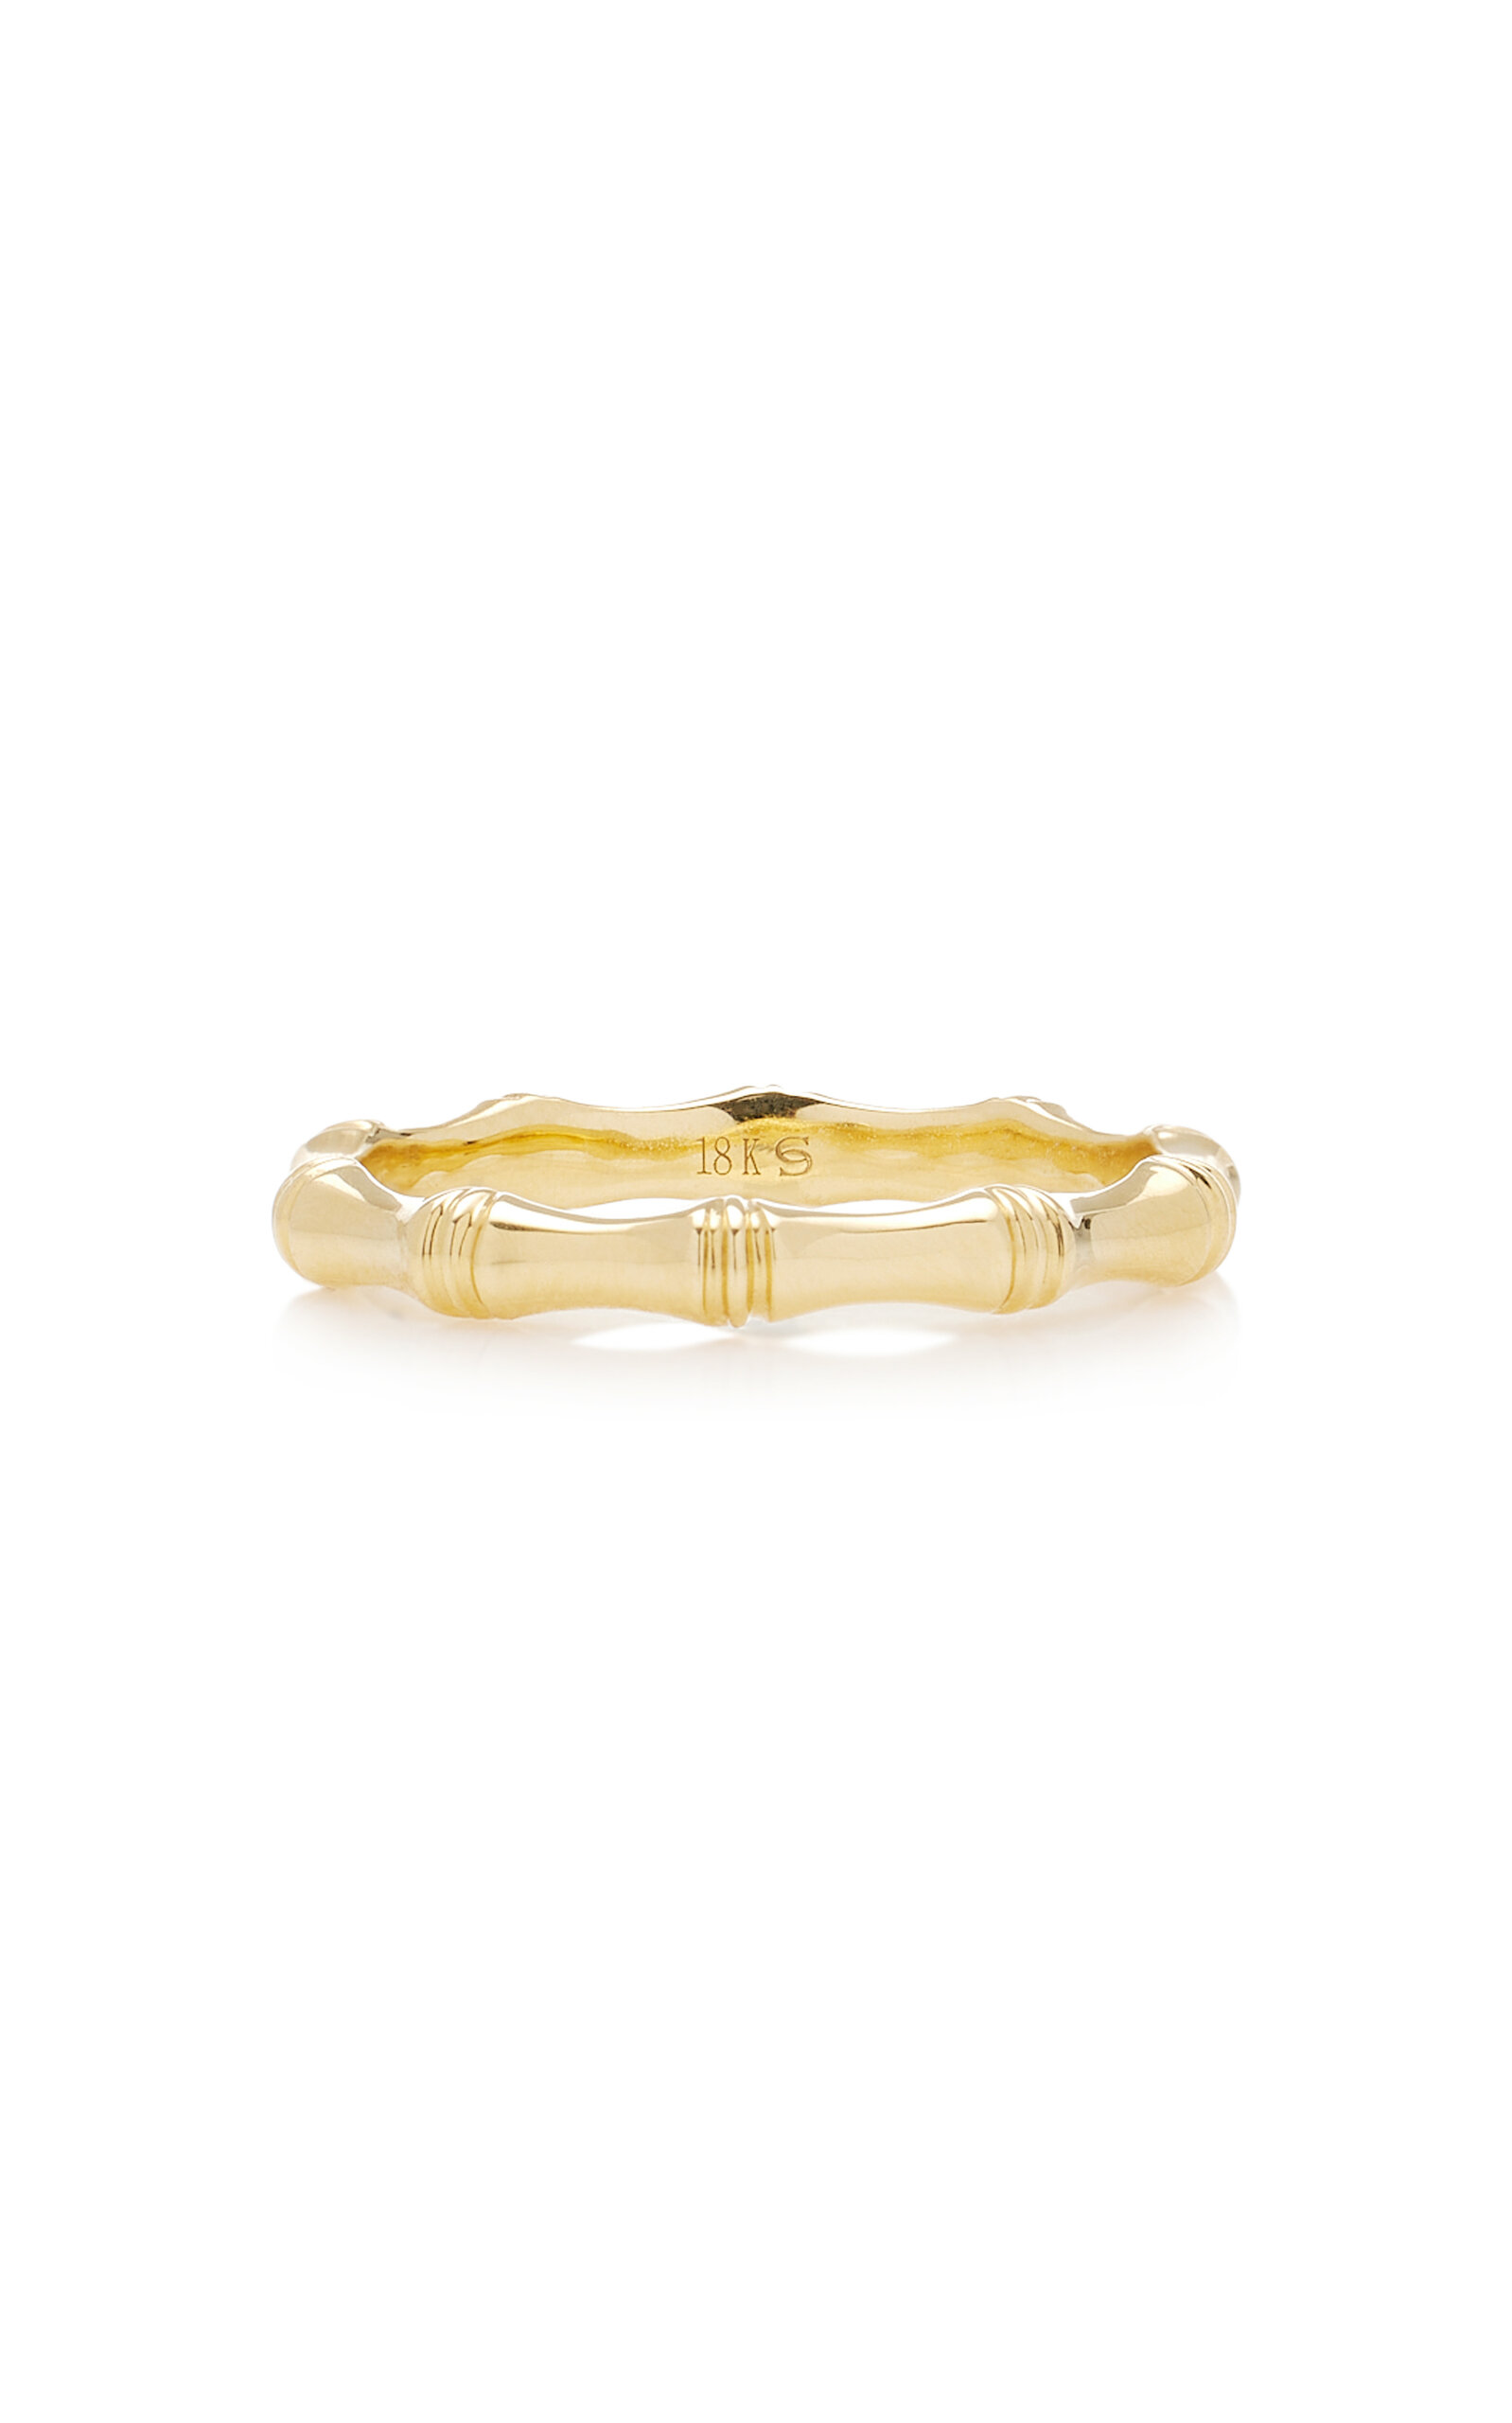 The Bamboo 18K Yellow Gold Ring